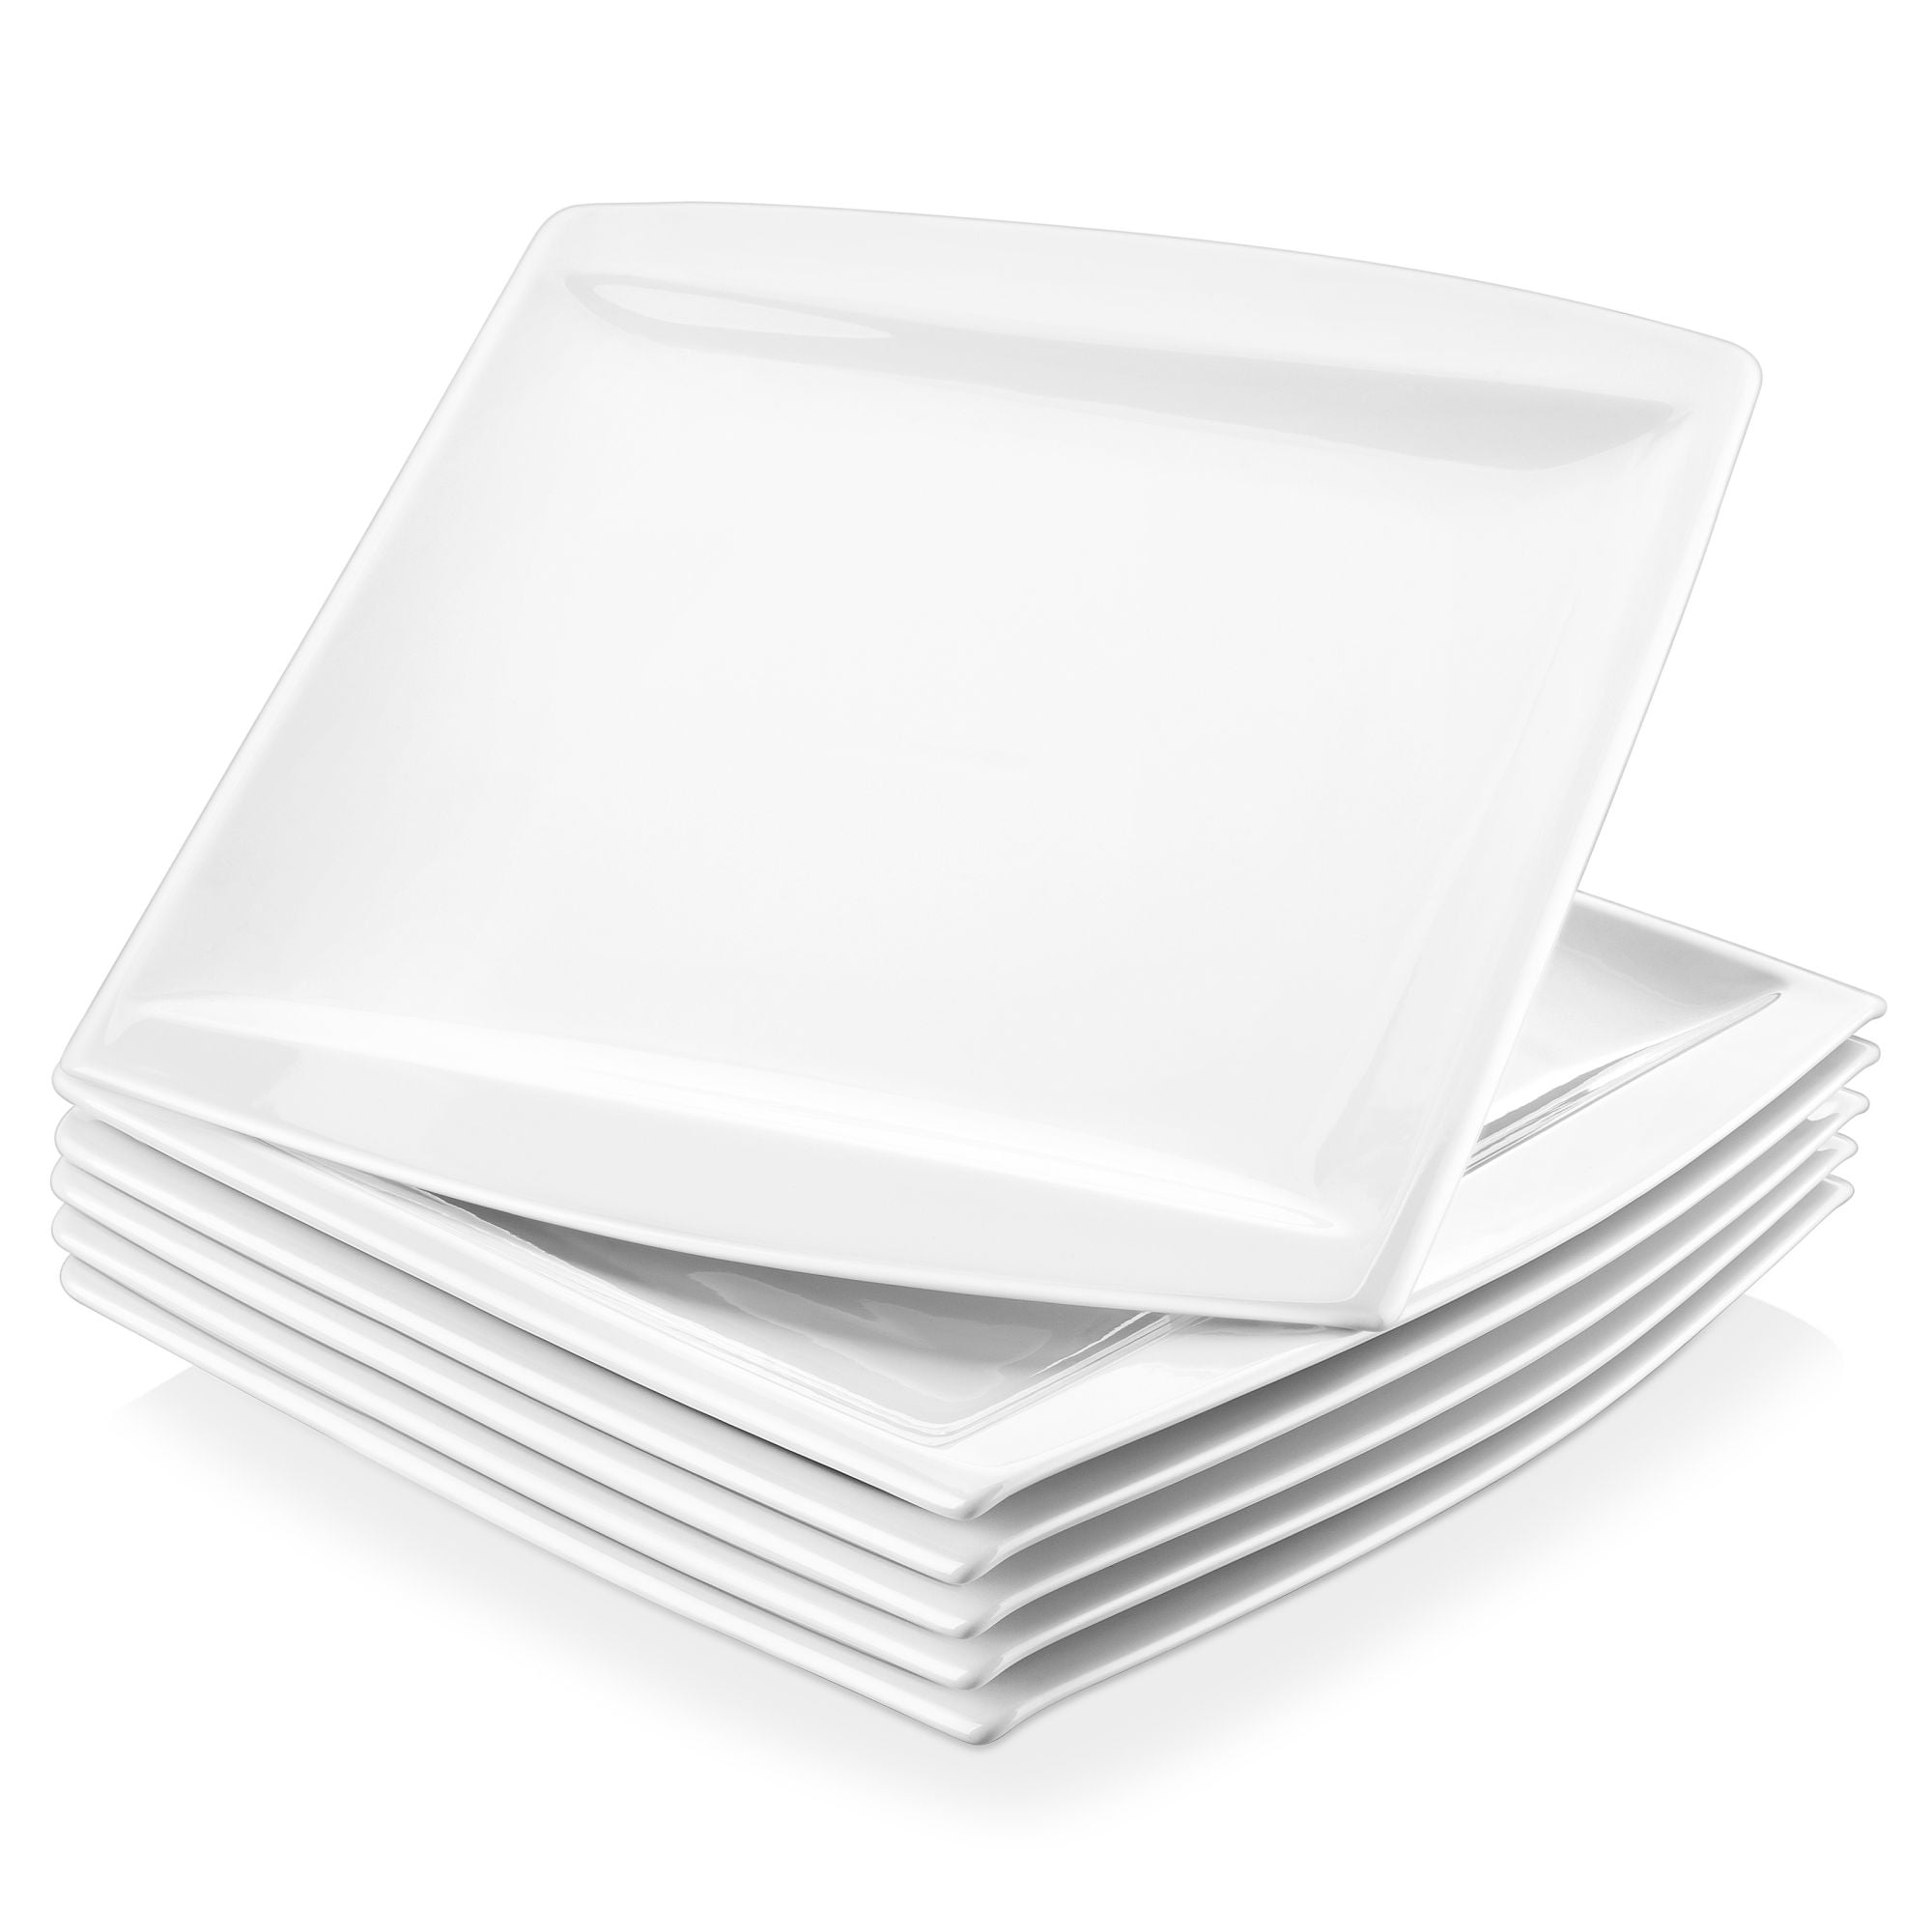 Malacasa Flora White Porcelain Fall Dinnerware Sets Clearance With 12xcup  Saucer, Dessert, Soup Plate Perfect For 12 People DHKRH From Bdesybag,  $154.23